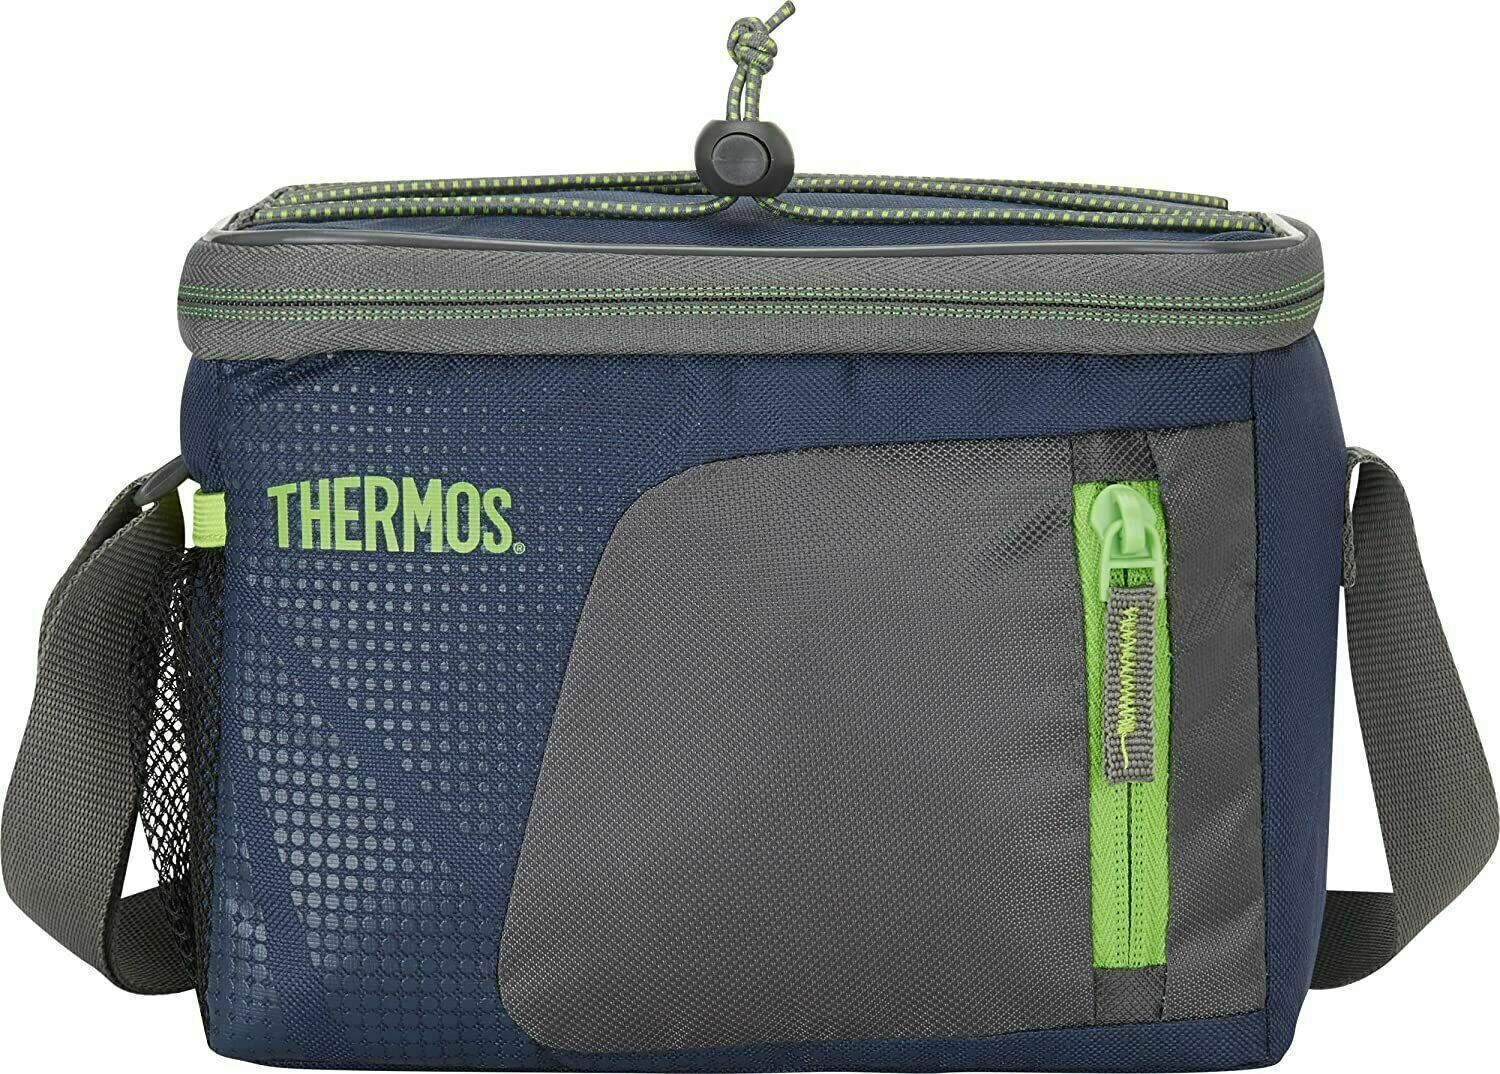 Thermos Radiance Navy Blue Insulated Picnic Camping Cooler Bag 6 Can 3.5 Litre 